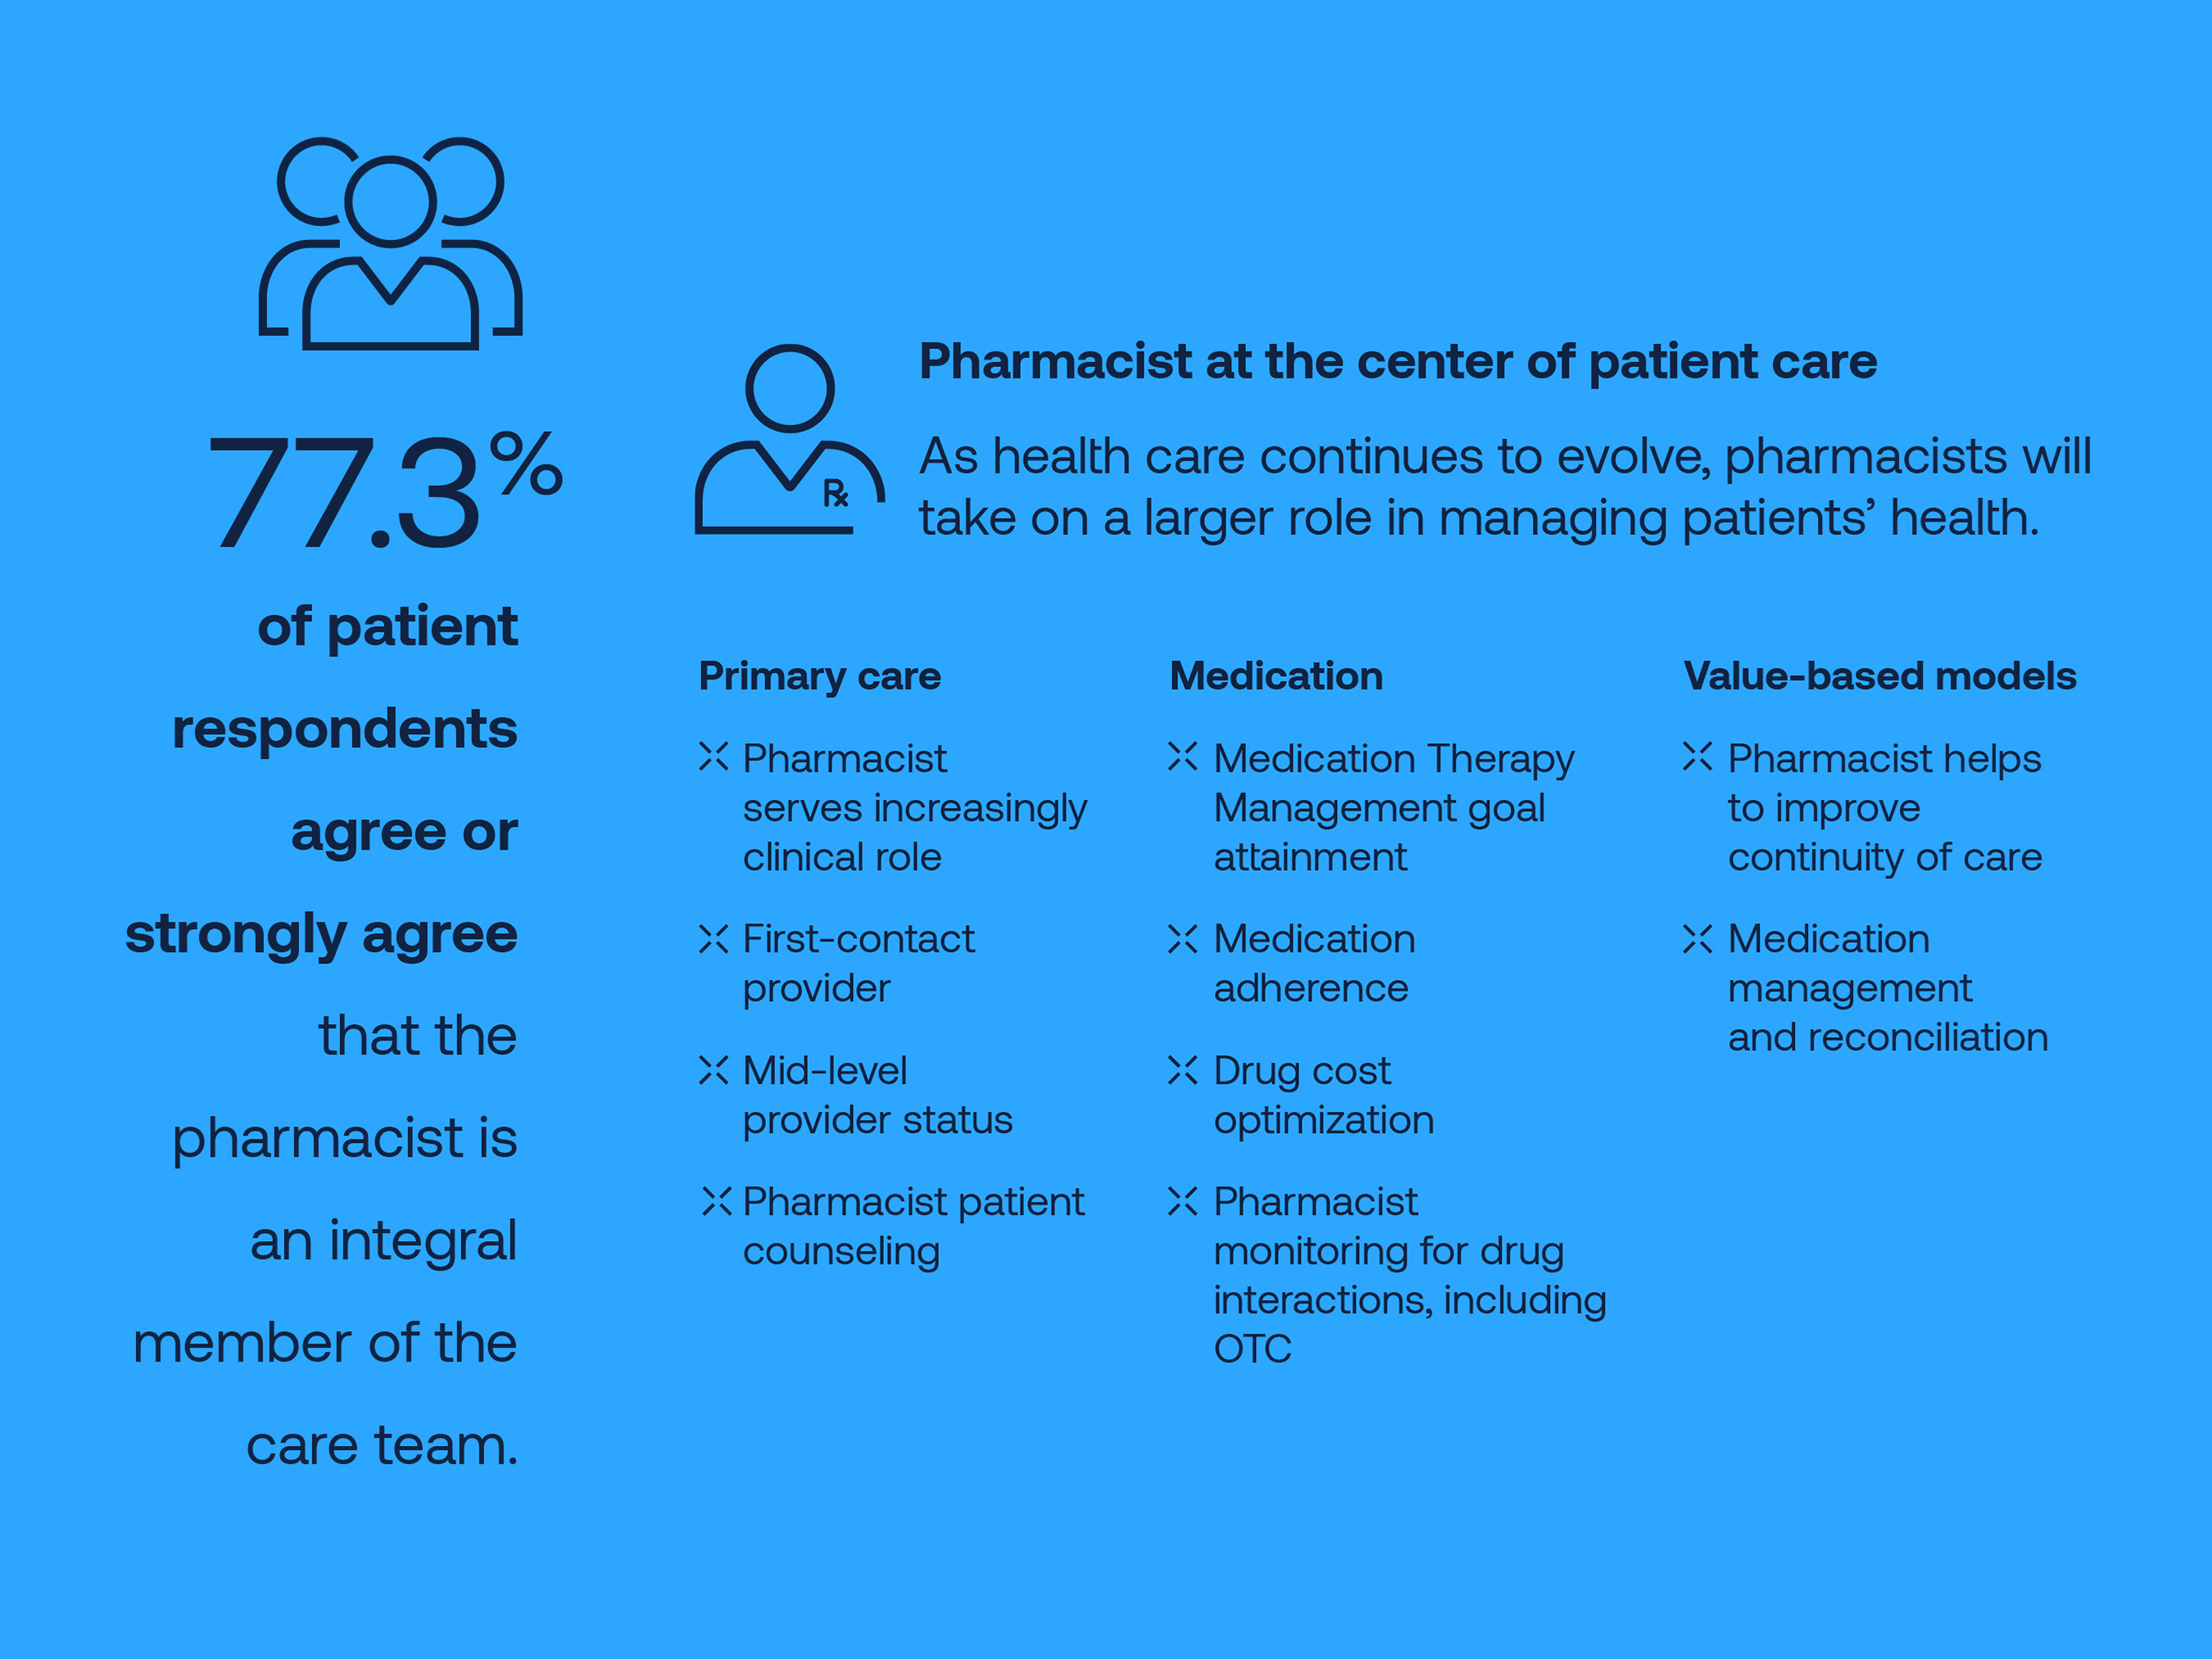 Pharmacists are at the center of patient care.